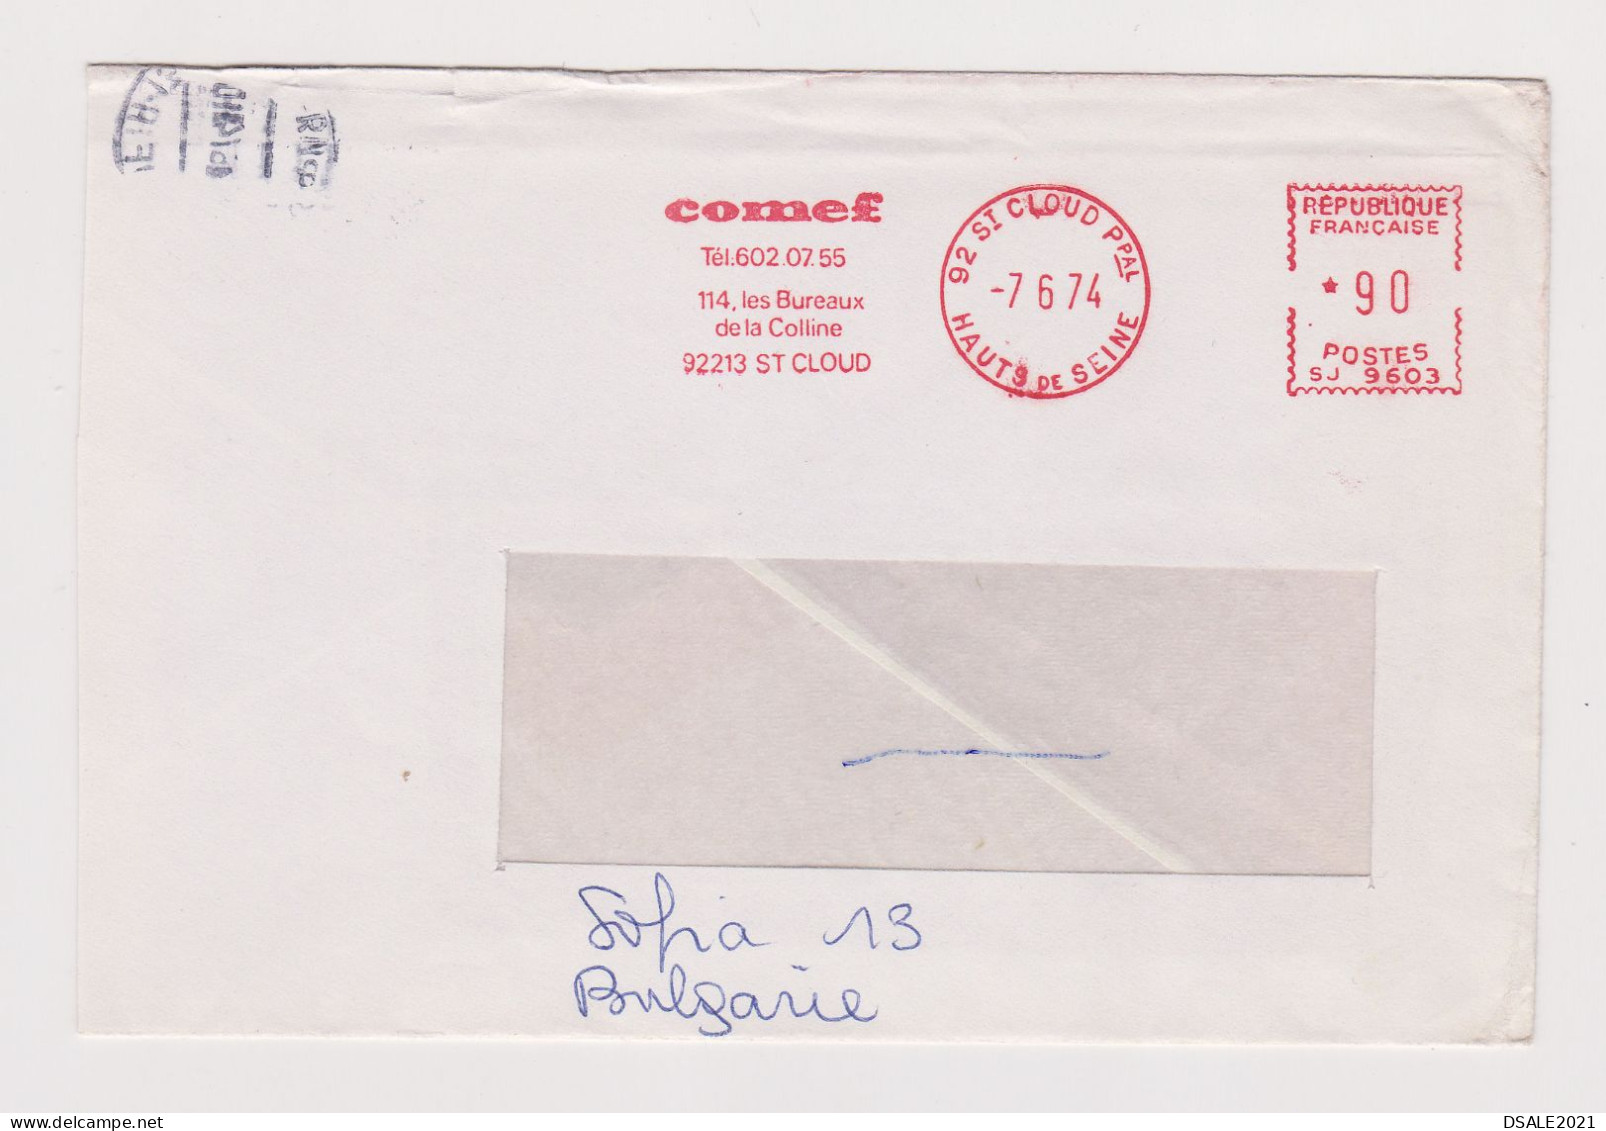 France 1970s Commerce Window Cover EMA METER Machine Stamp Comef Advertising, Sent Abroad To Bulgaria (930) - Covers & Documents